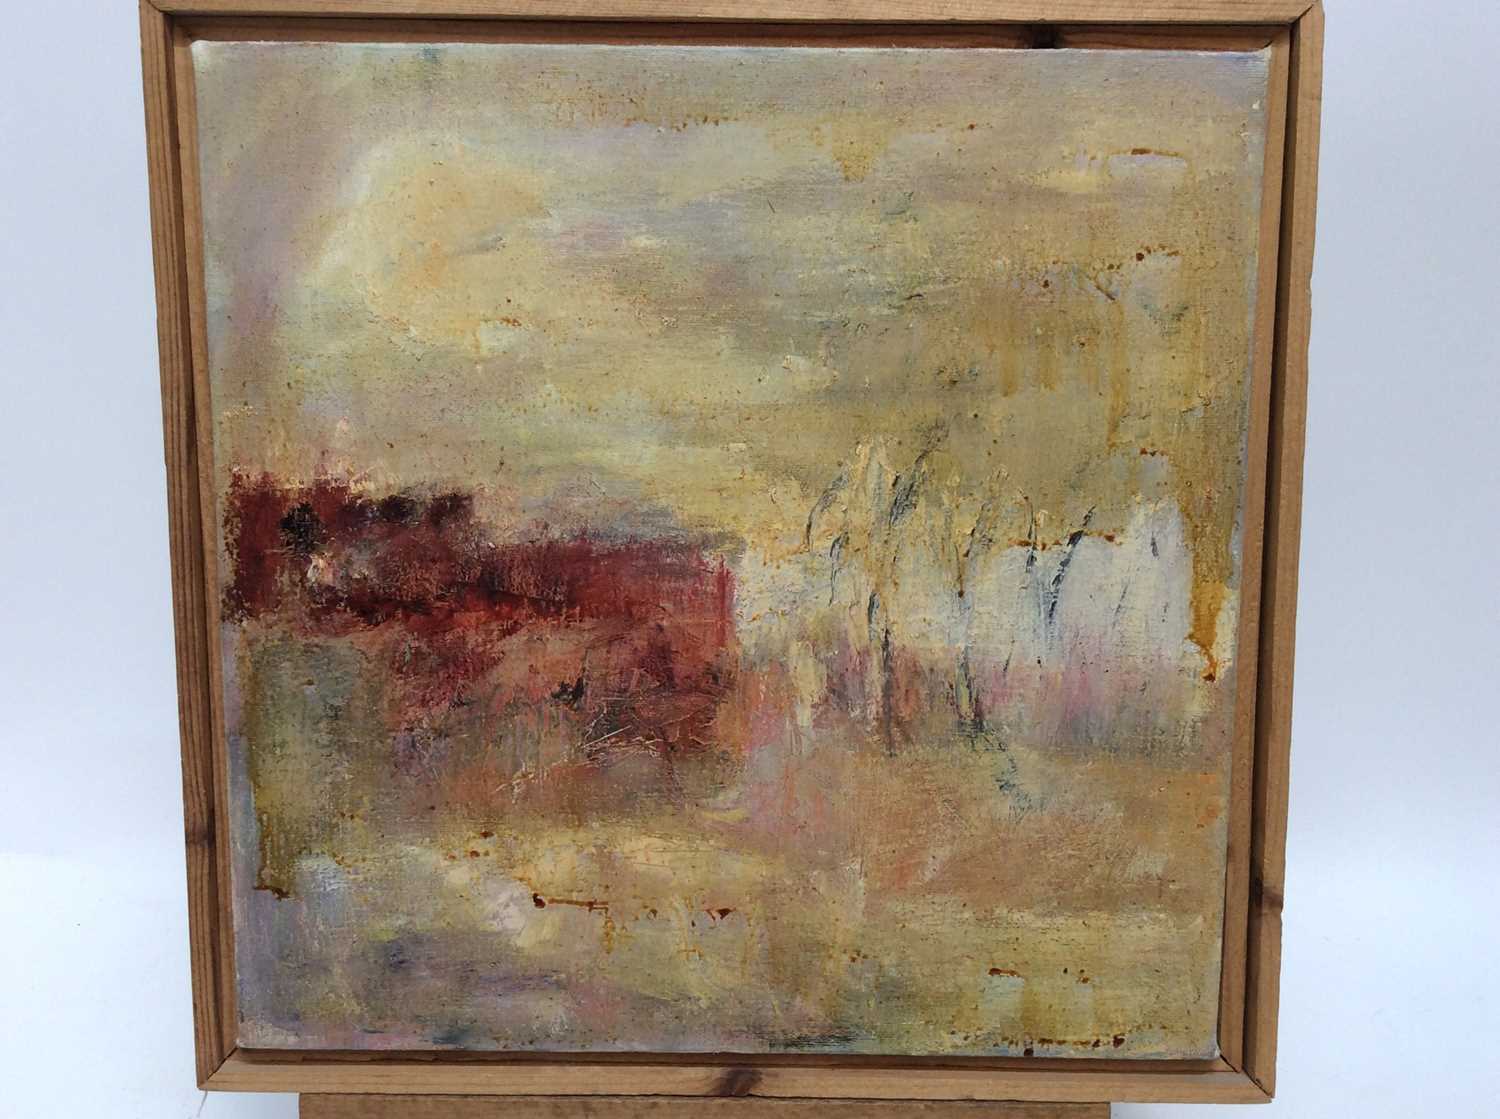 Lot 56 - English School, oil on canvas, 2nd half 20th century - Abstract, 36cm square, framed